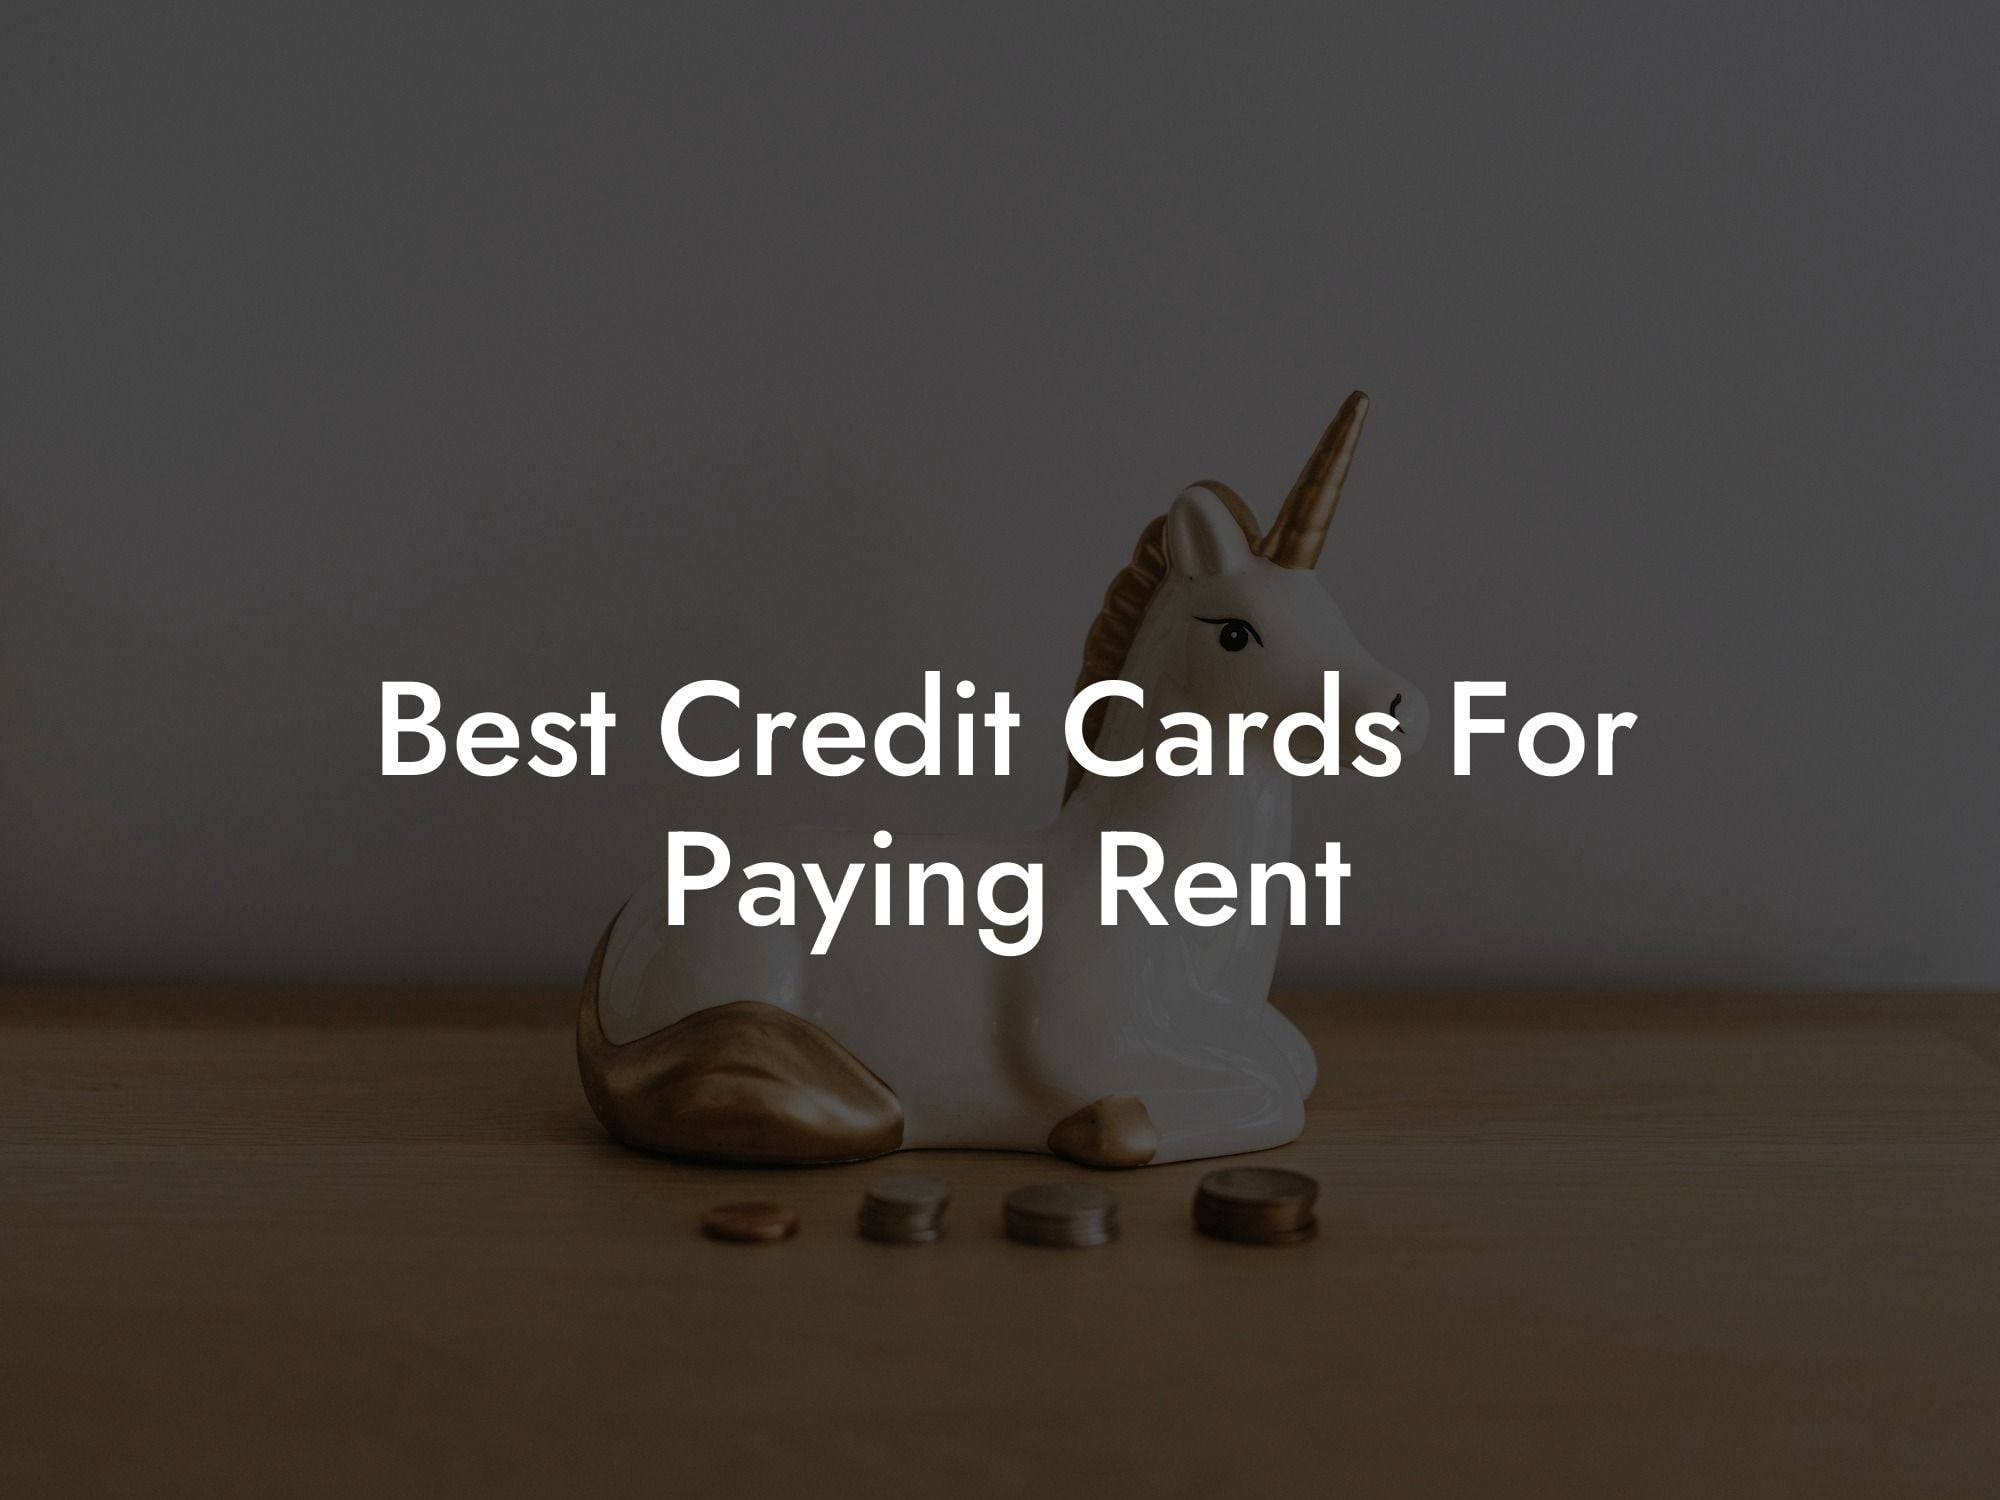 Best Credit Cards For Paying Rent